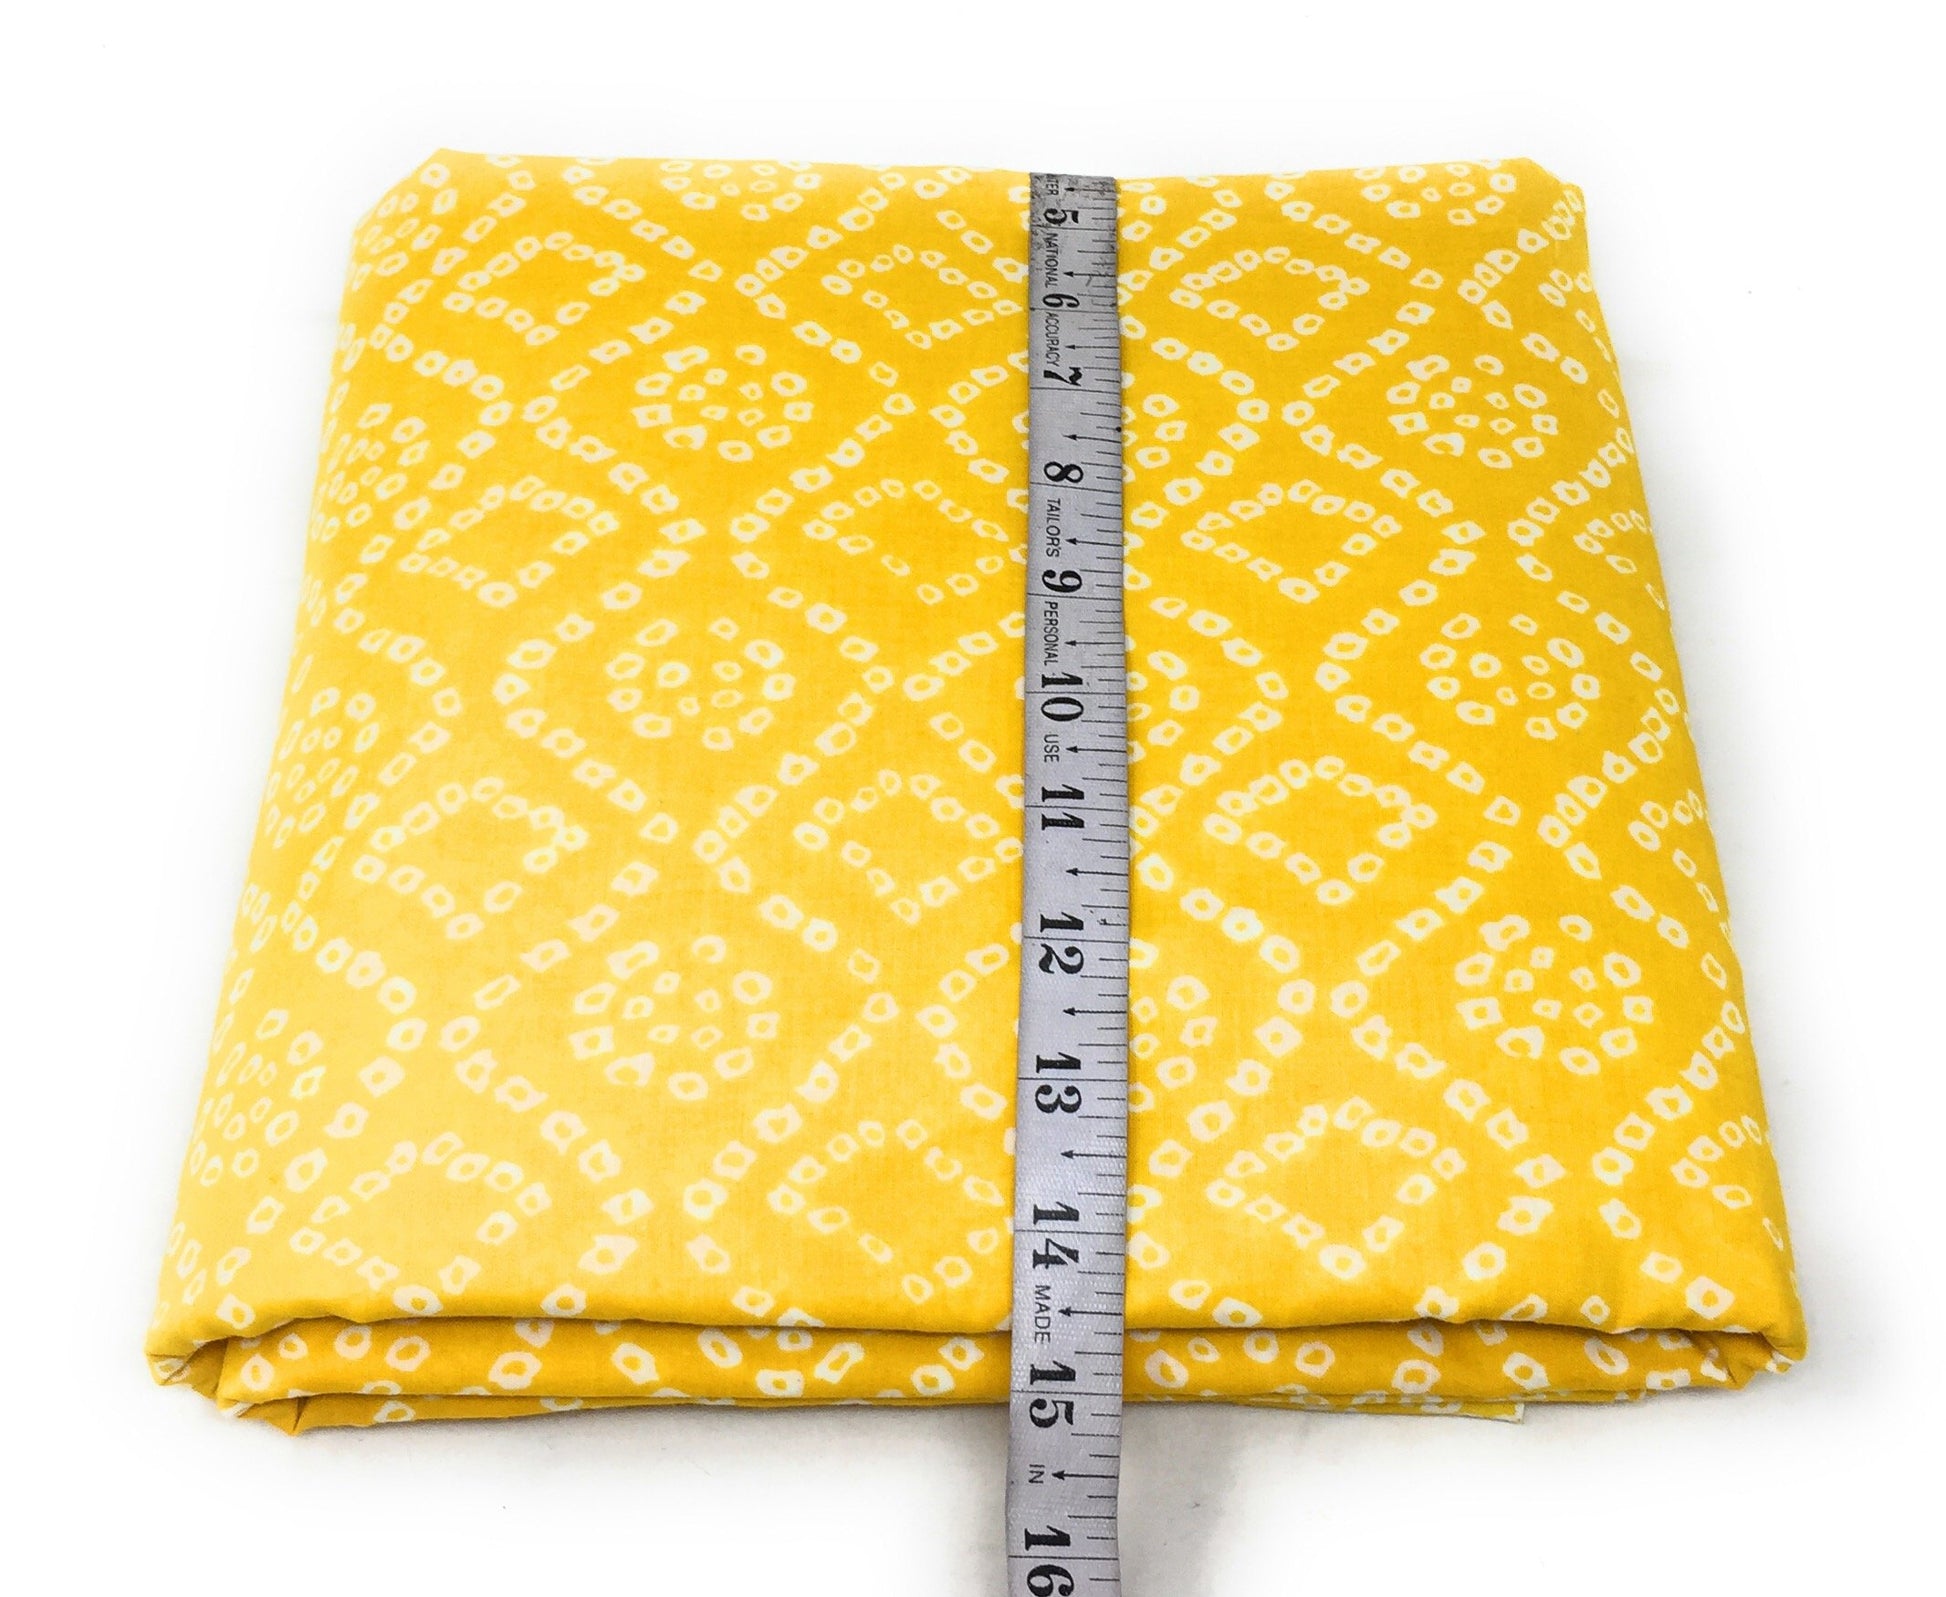 Soft light Cotton Yellow Printed Fabric Material 